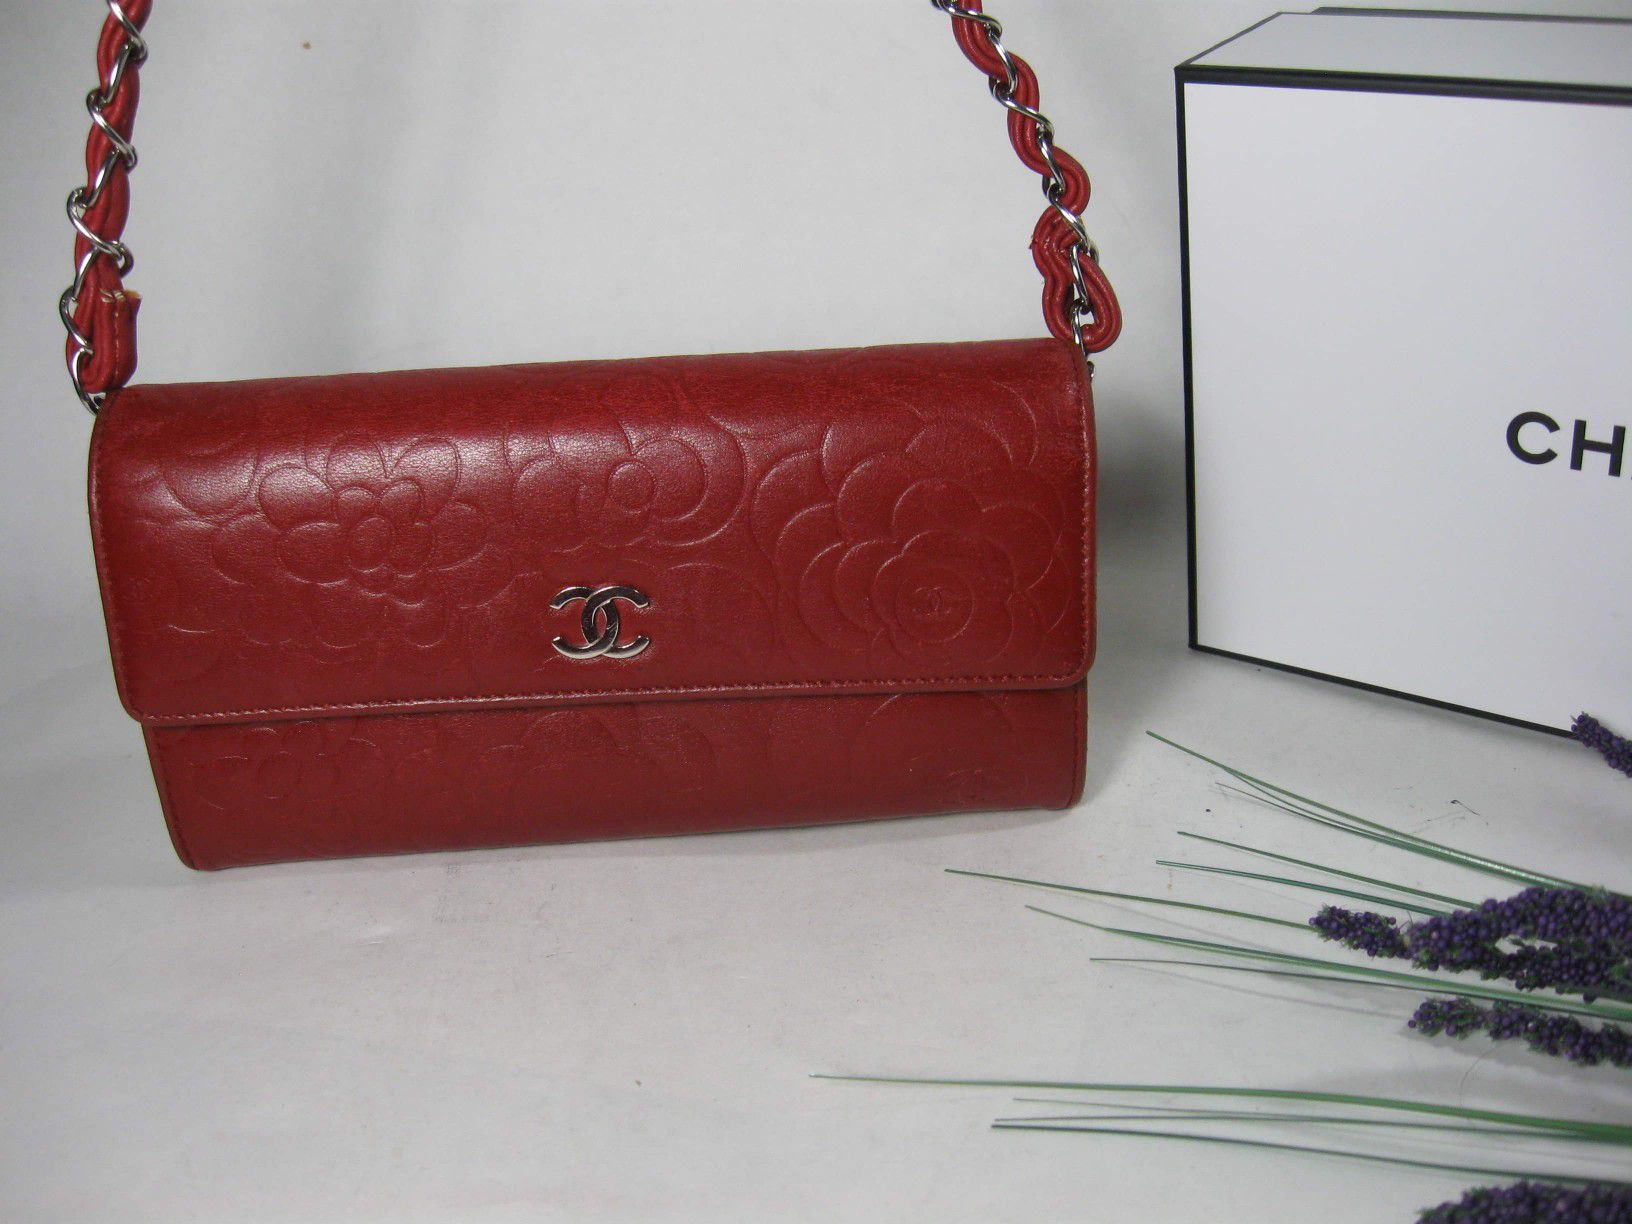 Chanel Red Floral Lambskin Leather CC Long Flap Bag Wallet